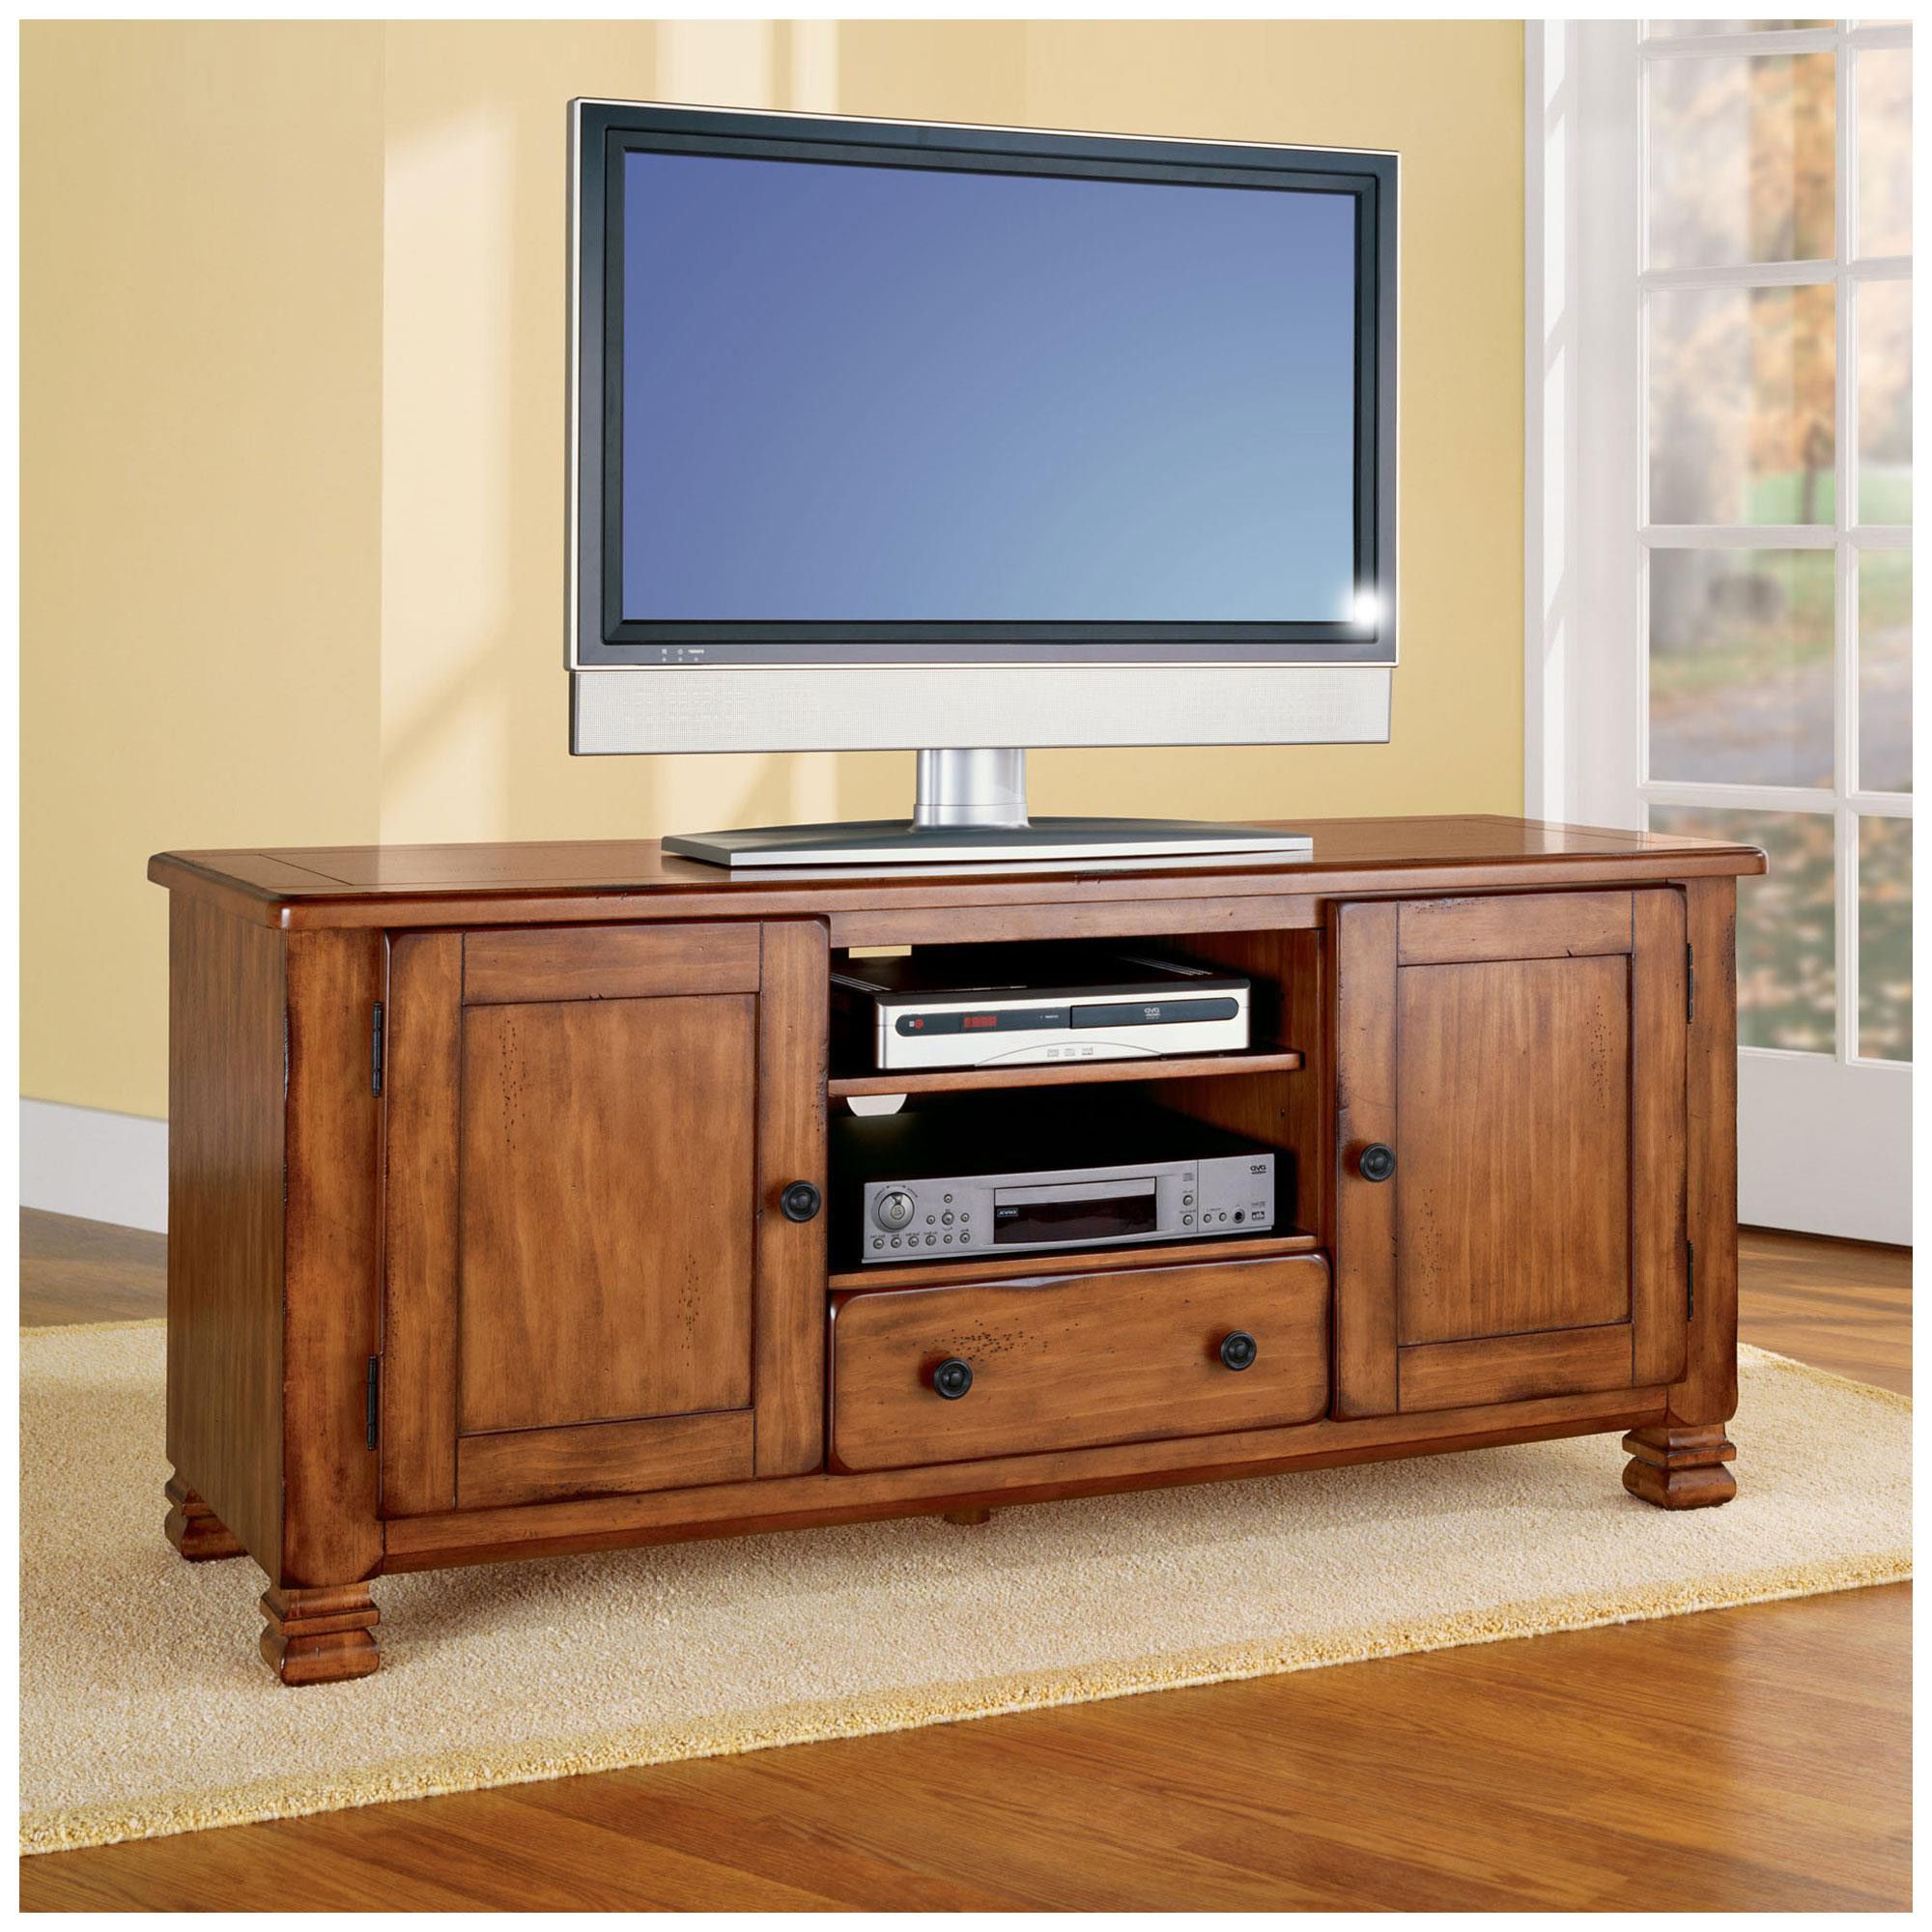 2017 Amish Corner Tv Stand Solid Wood Console Mission Style Stands For Pertaining To Real Wood Corner Tv Stands (View 9 of 20)